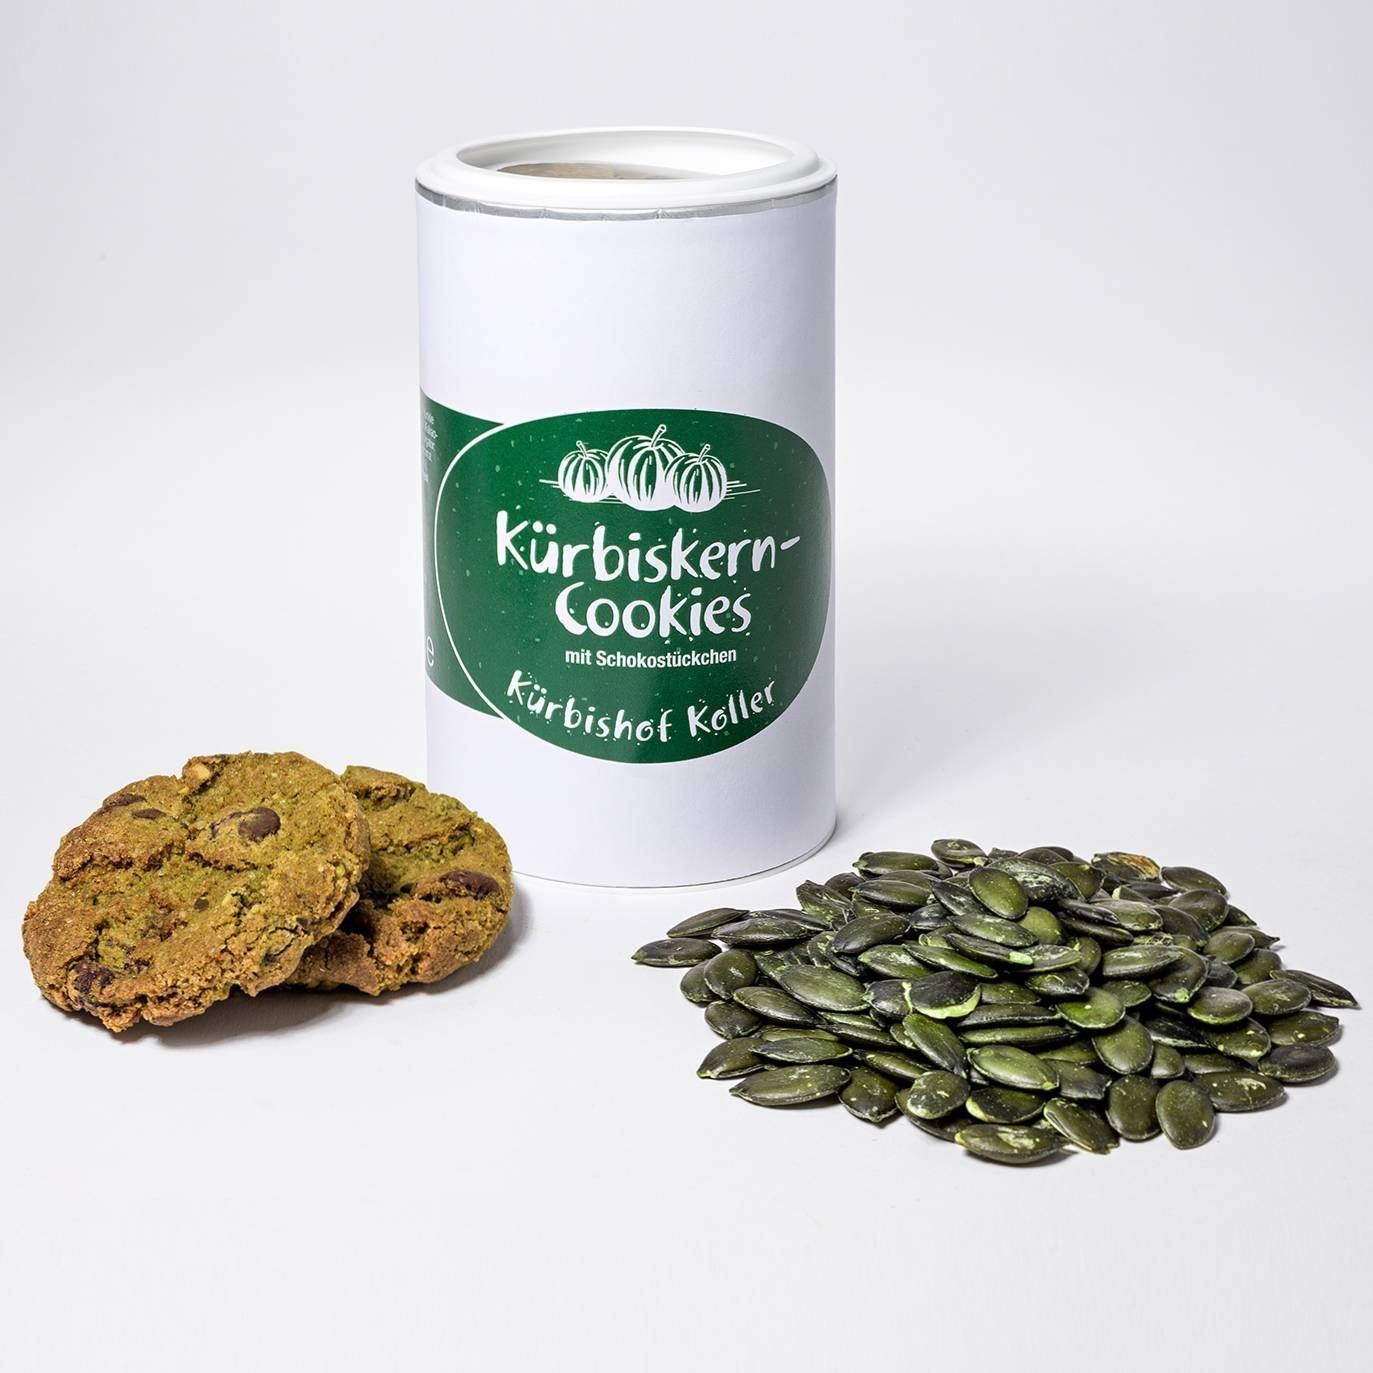 Pumpkin Seed Cookies with Chocolate Chips in Switzerland